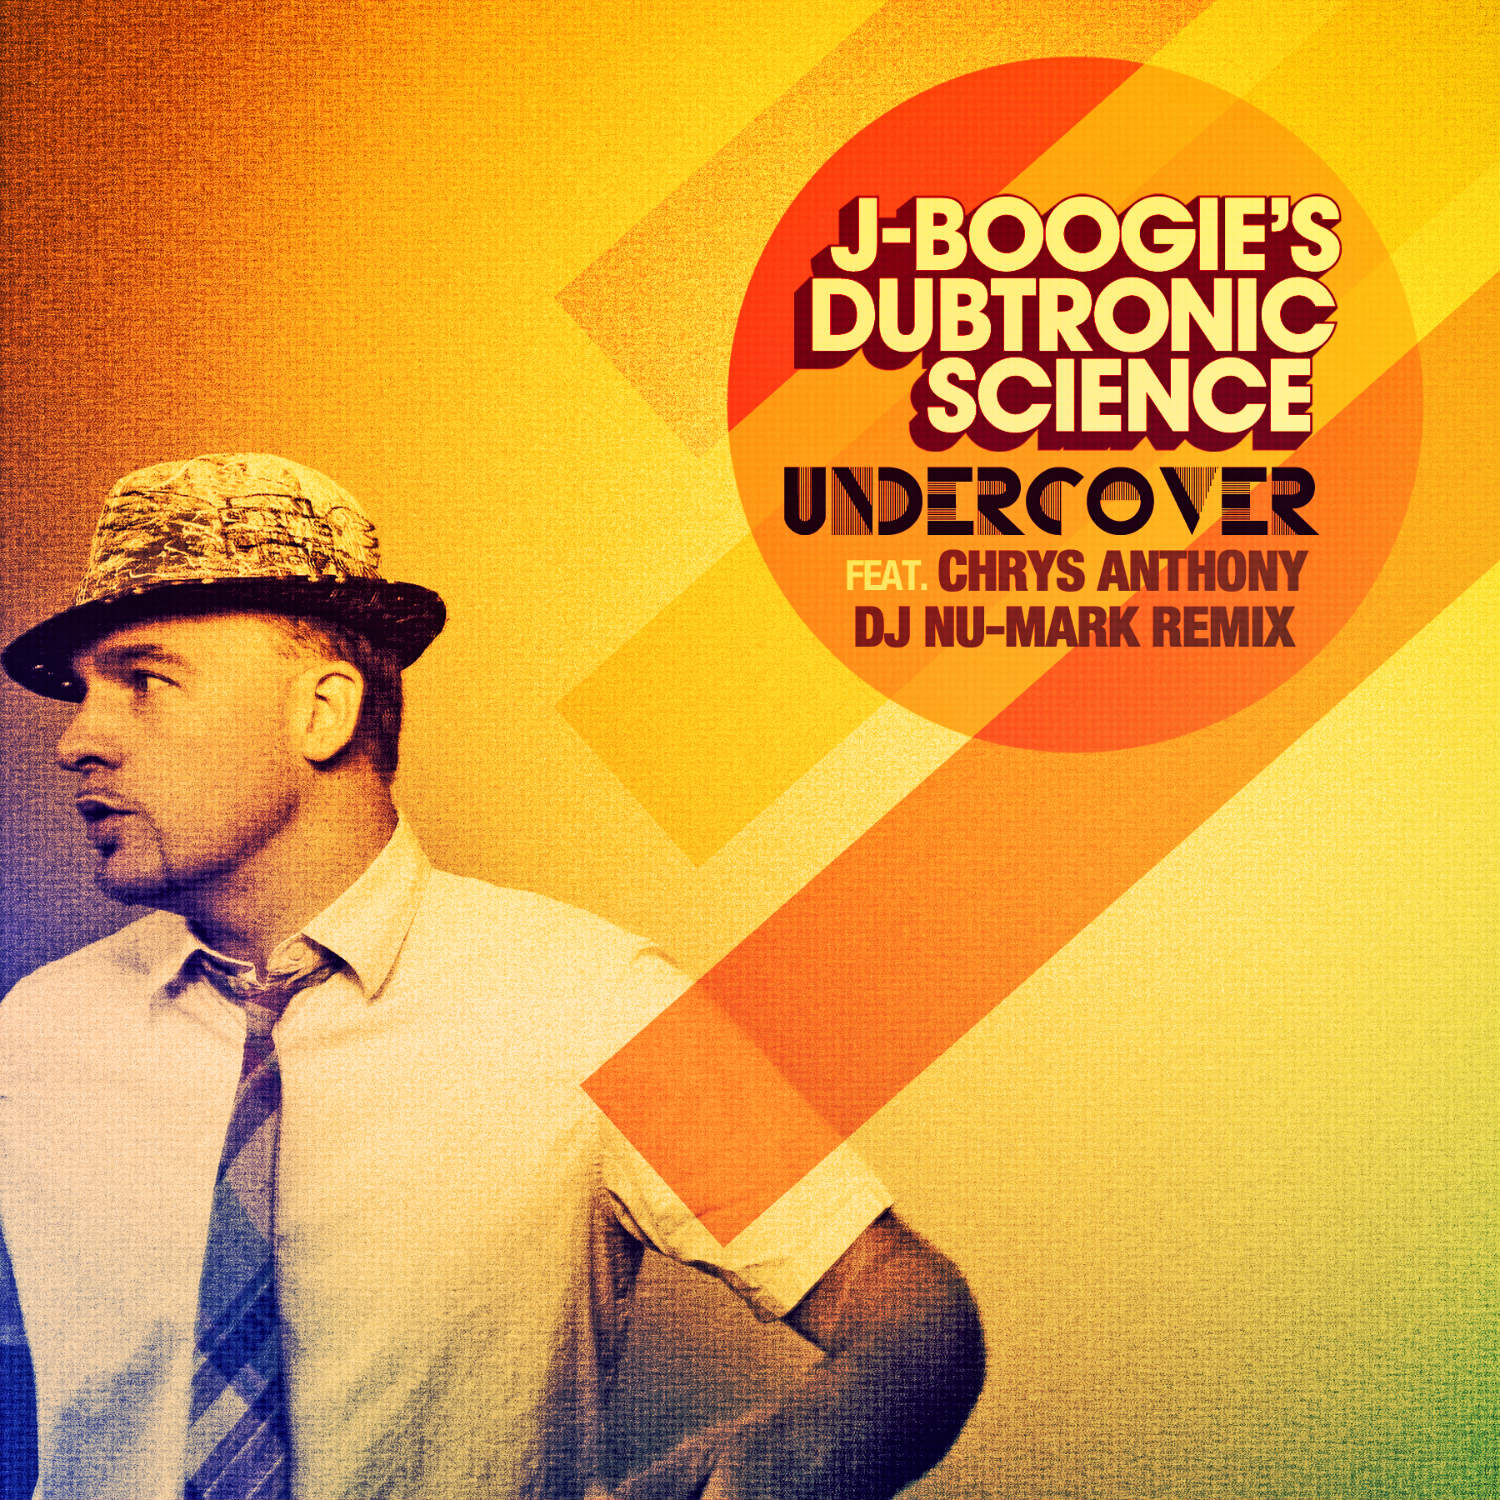 J Boogie's Dubtronic Science - Undercover feat. Chrys Anthony 